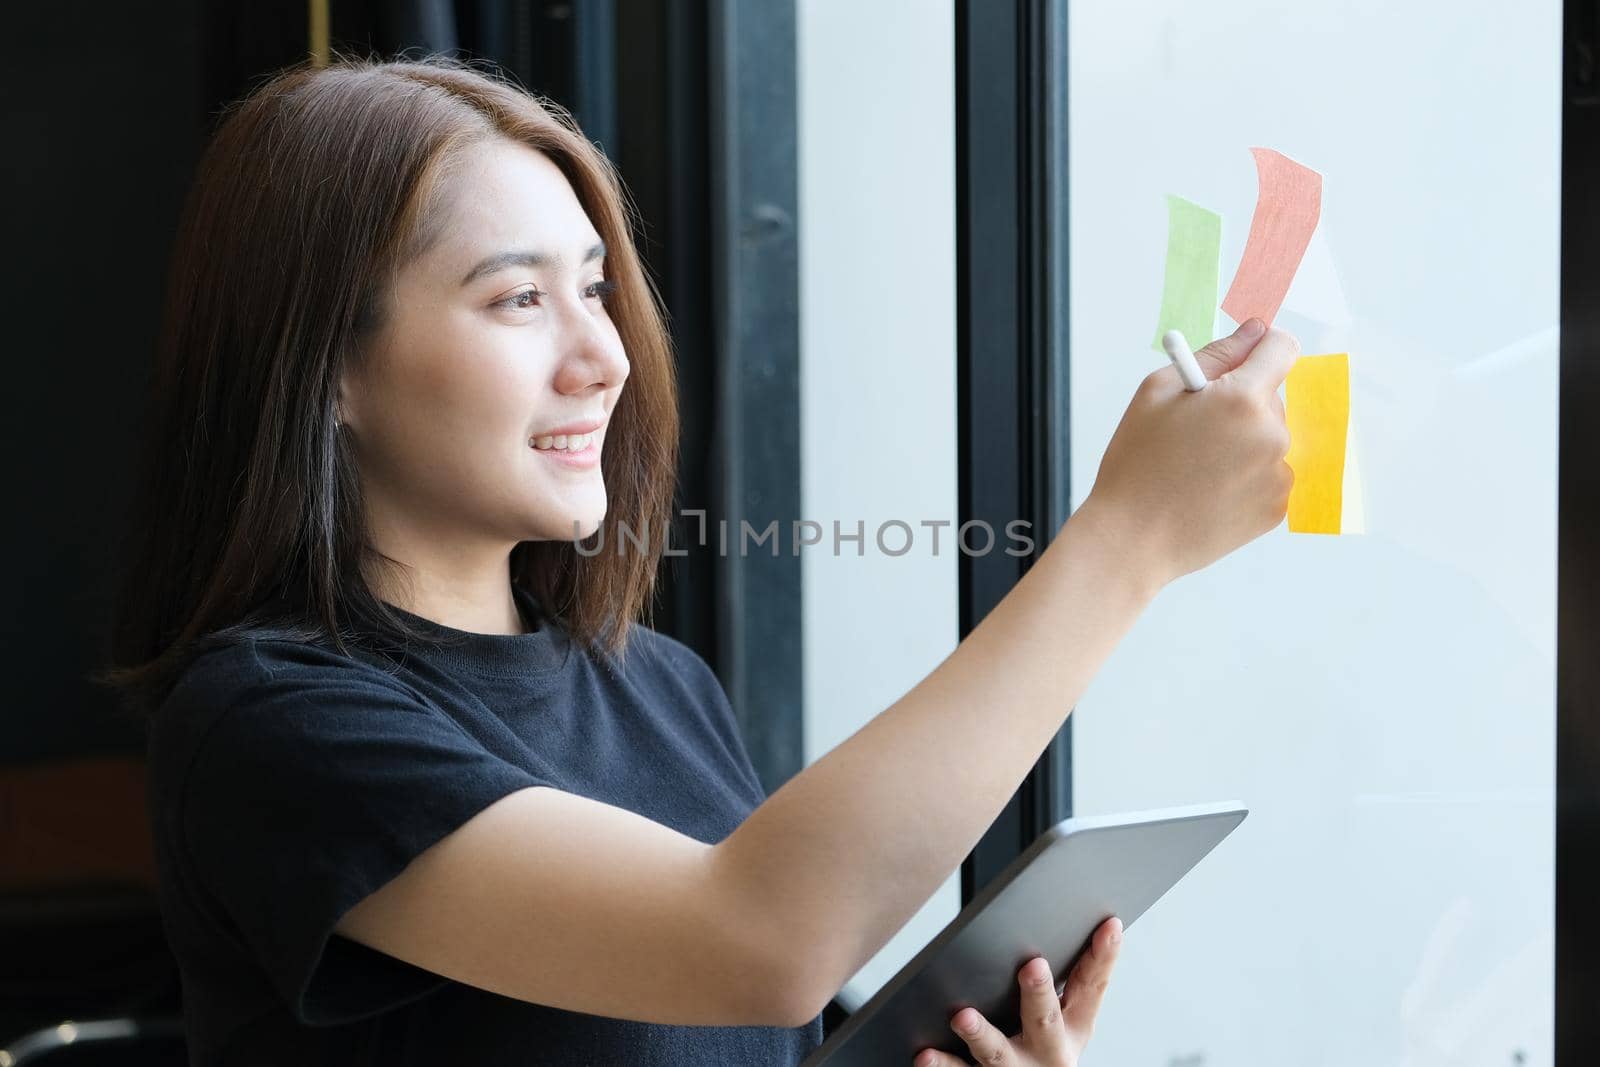 A female company employee using notepad and tablet to analyze company budgets. by Manastrong